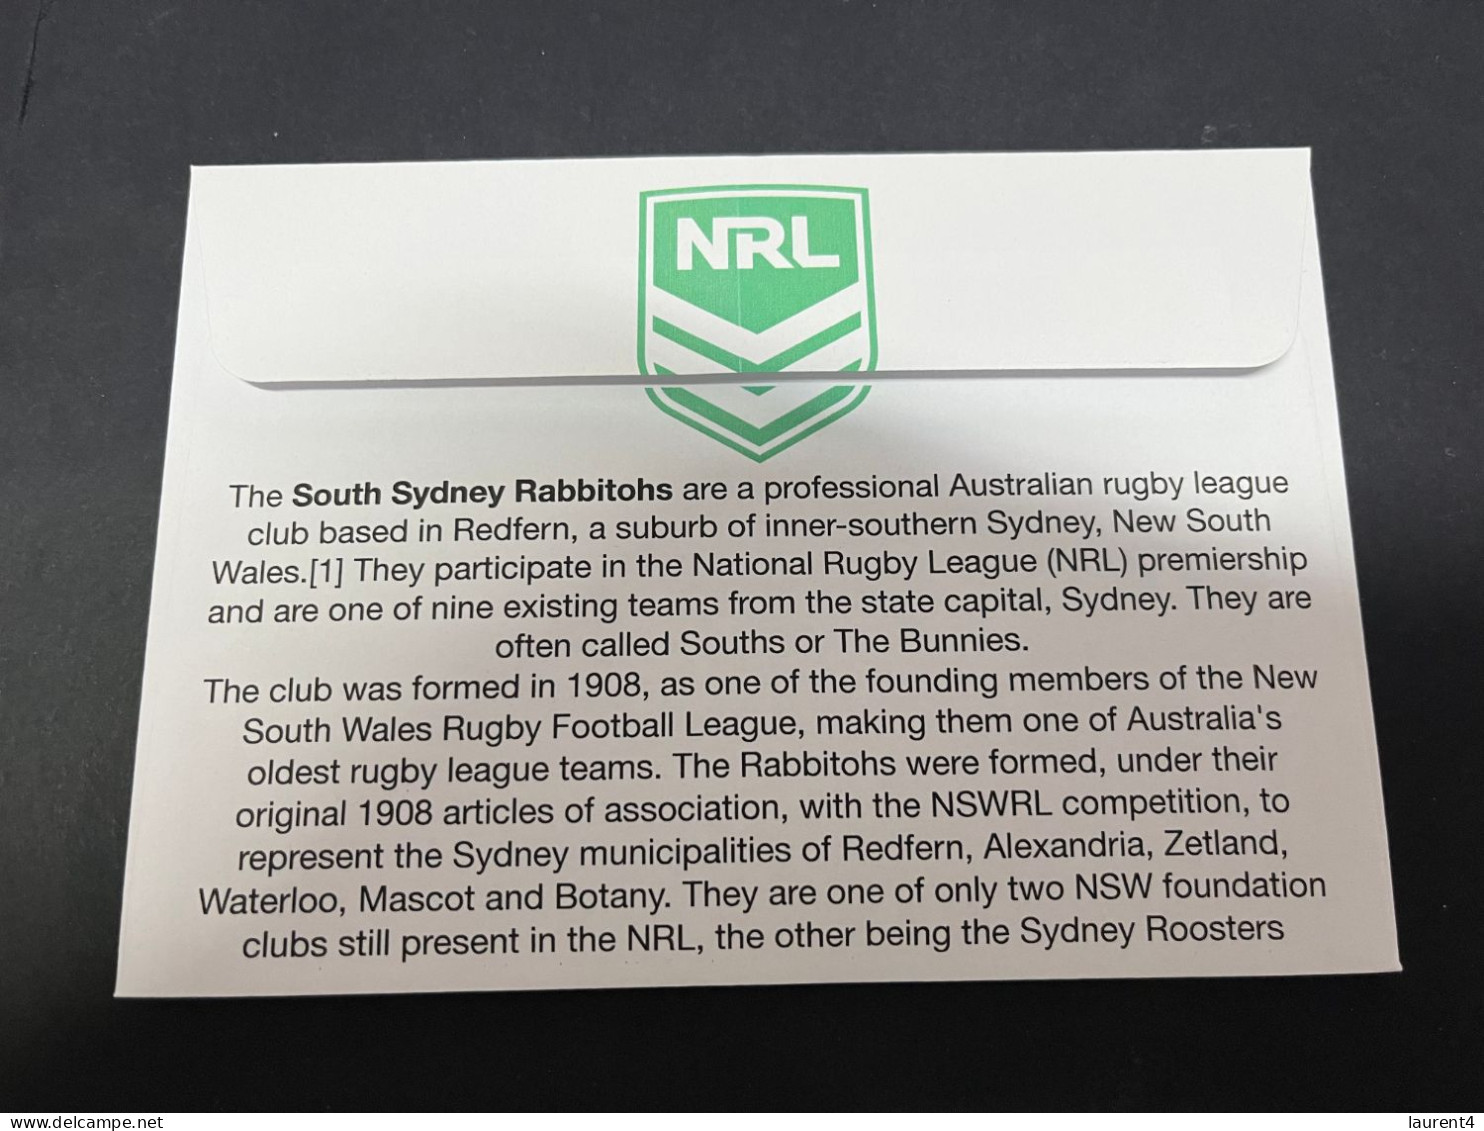 29-3-2024 (4 Y 23) Australian New $ 1.00 Coin (NRL South Sydney Rabbitohs) Released 28-3-2024 (1 X Coin On Cover) - Dollar